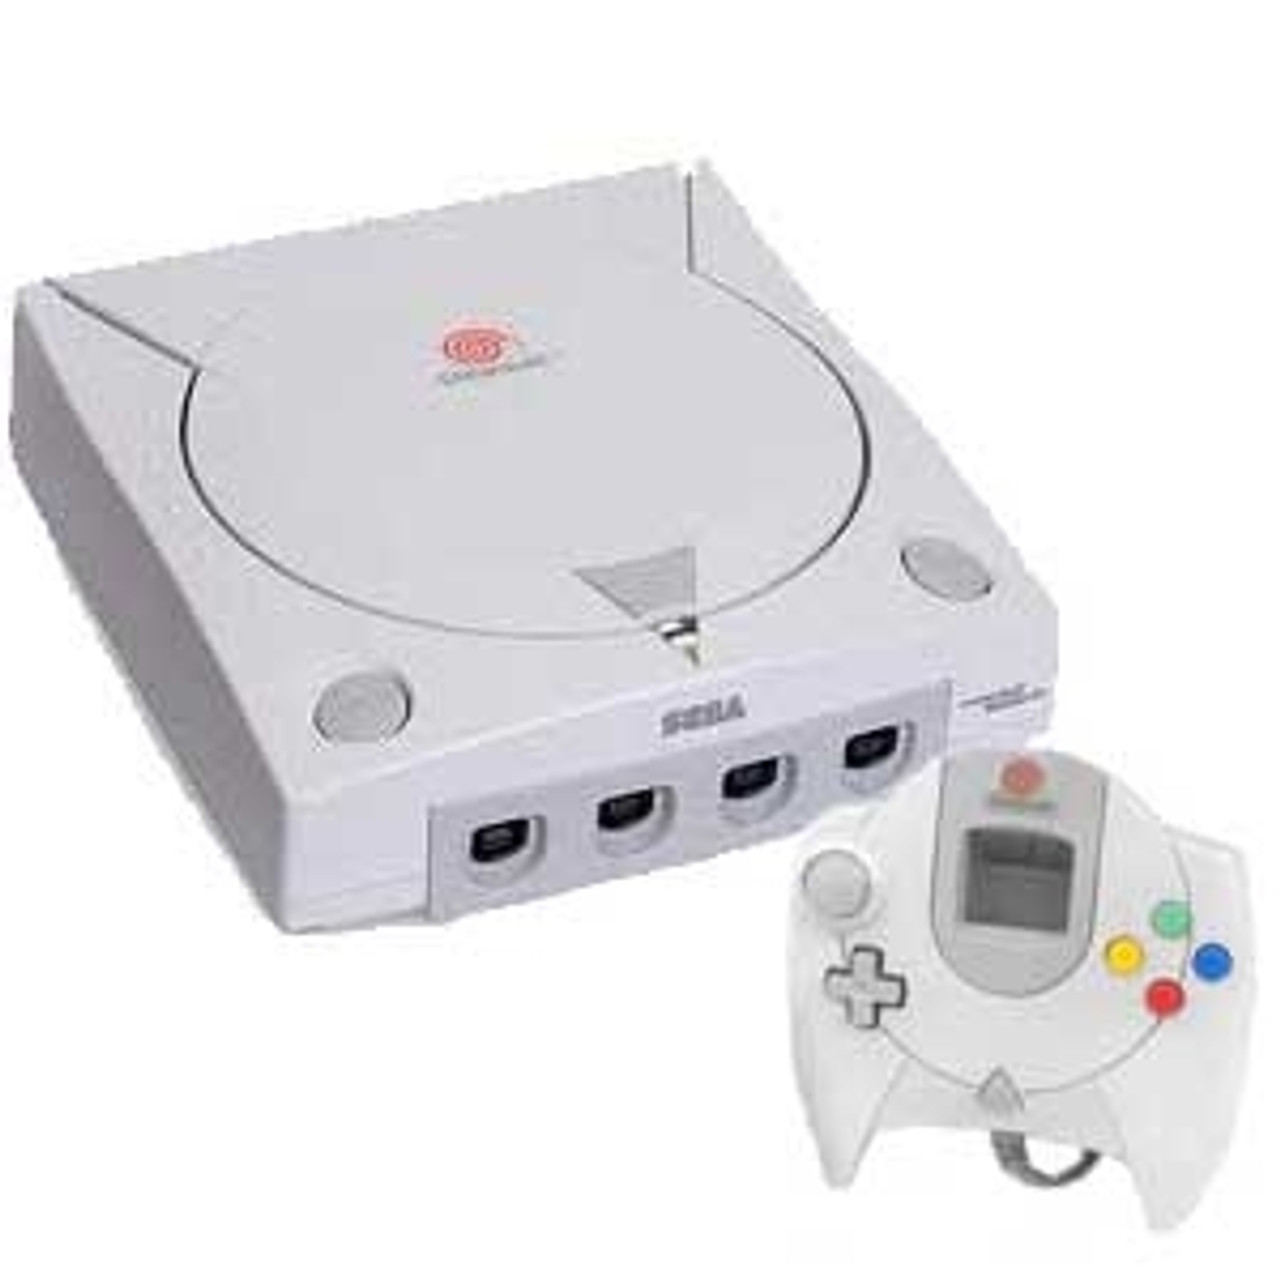 https://cdn11.bigcommerce.com/s-ymgqt/images/stencil/1280x1280/products/31038/21921/System-Dreamcast-White-2__91818.1712603527.jpg?c=2